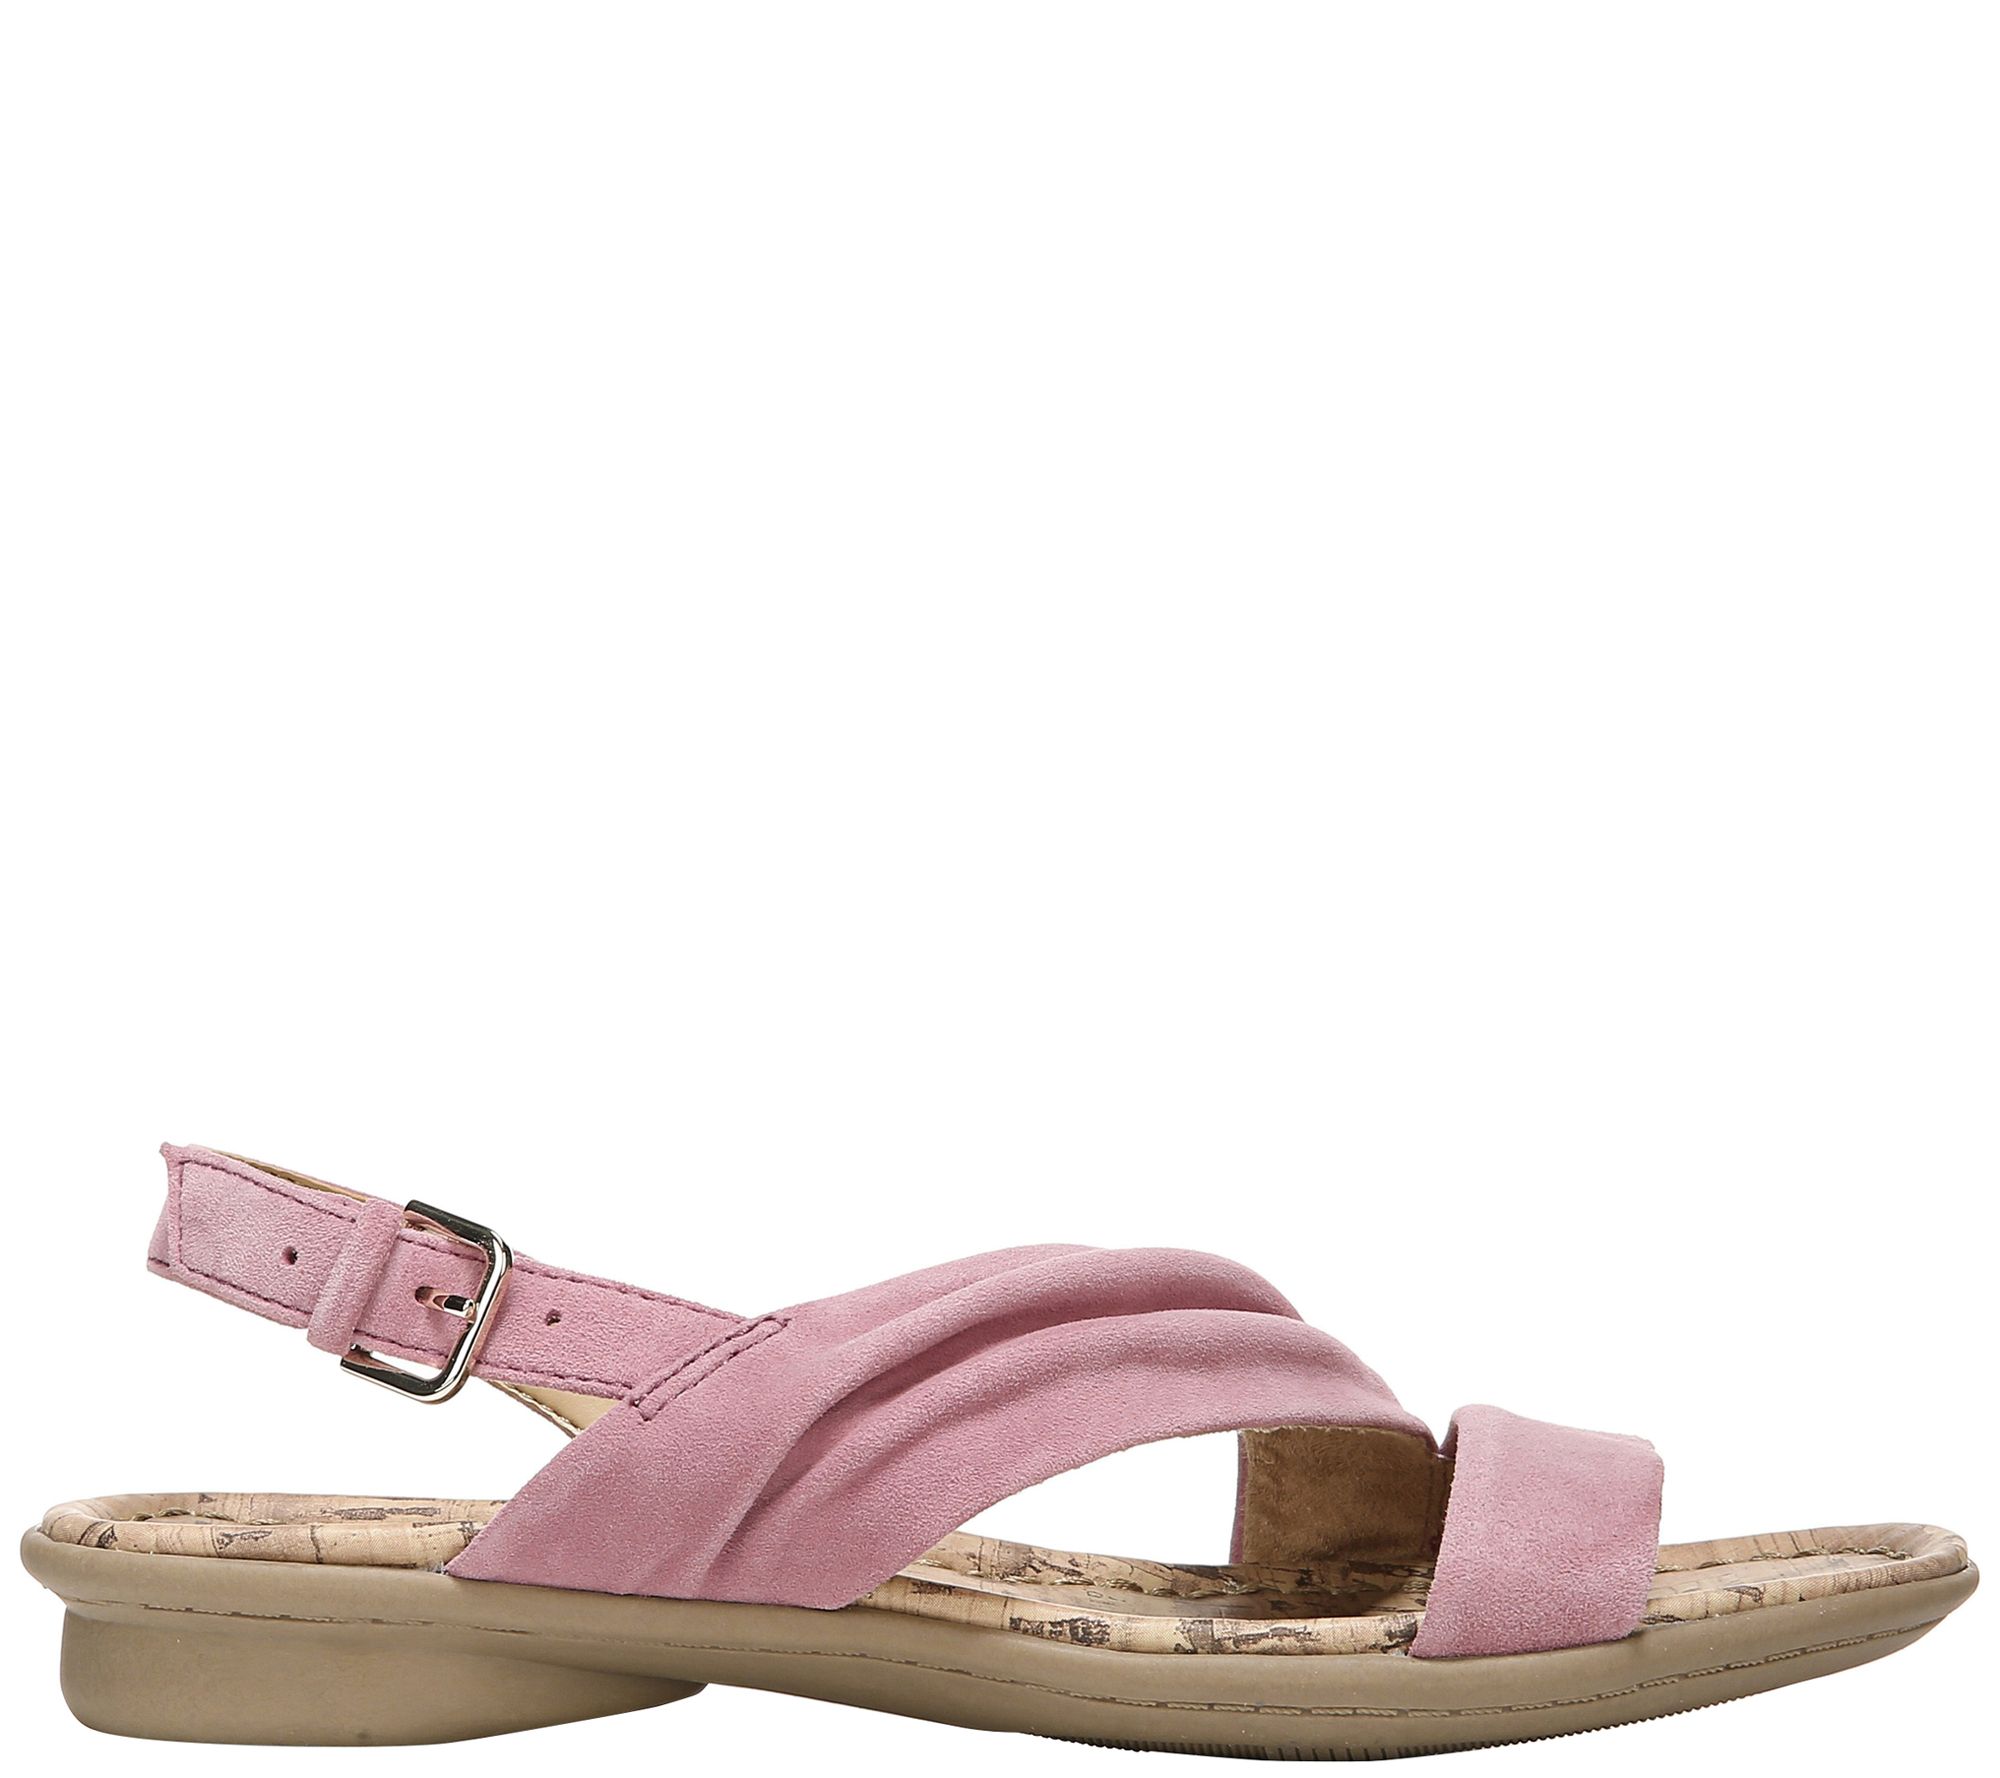 Naturalizer Casual Leather Sandals - Wyn - QVC.com